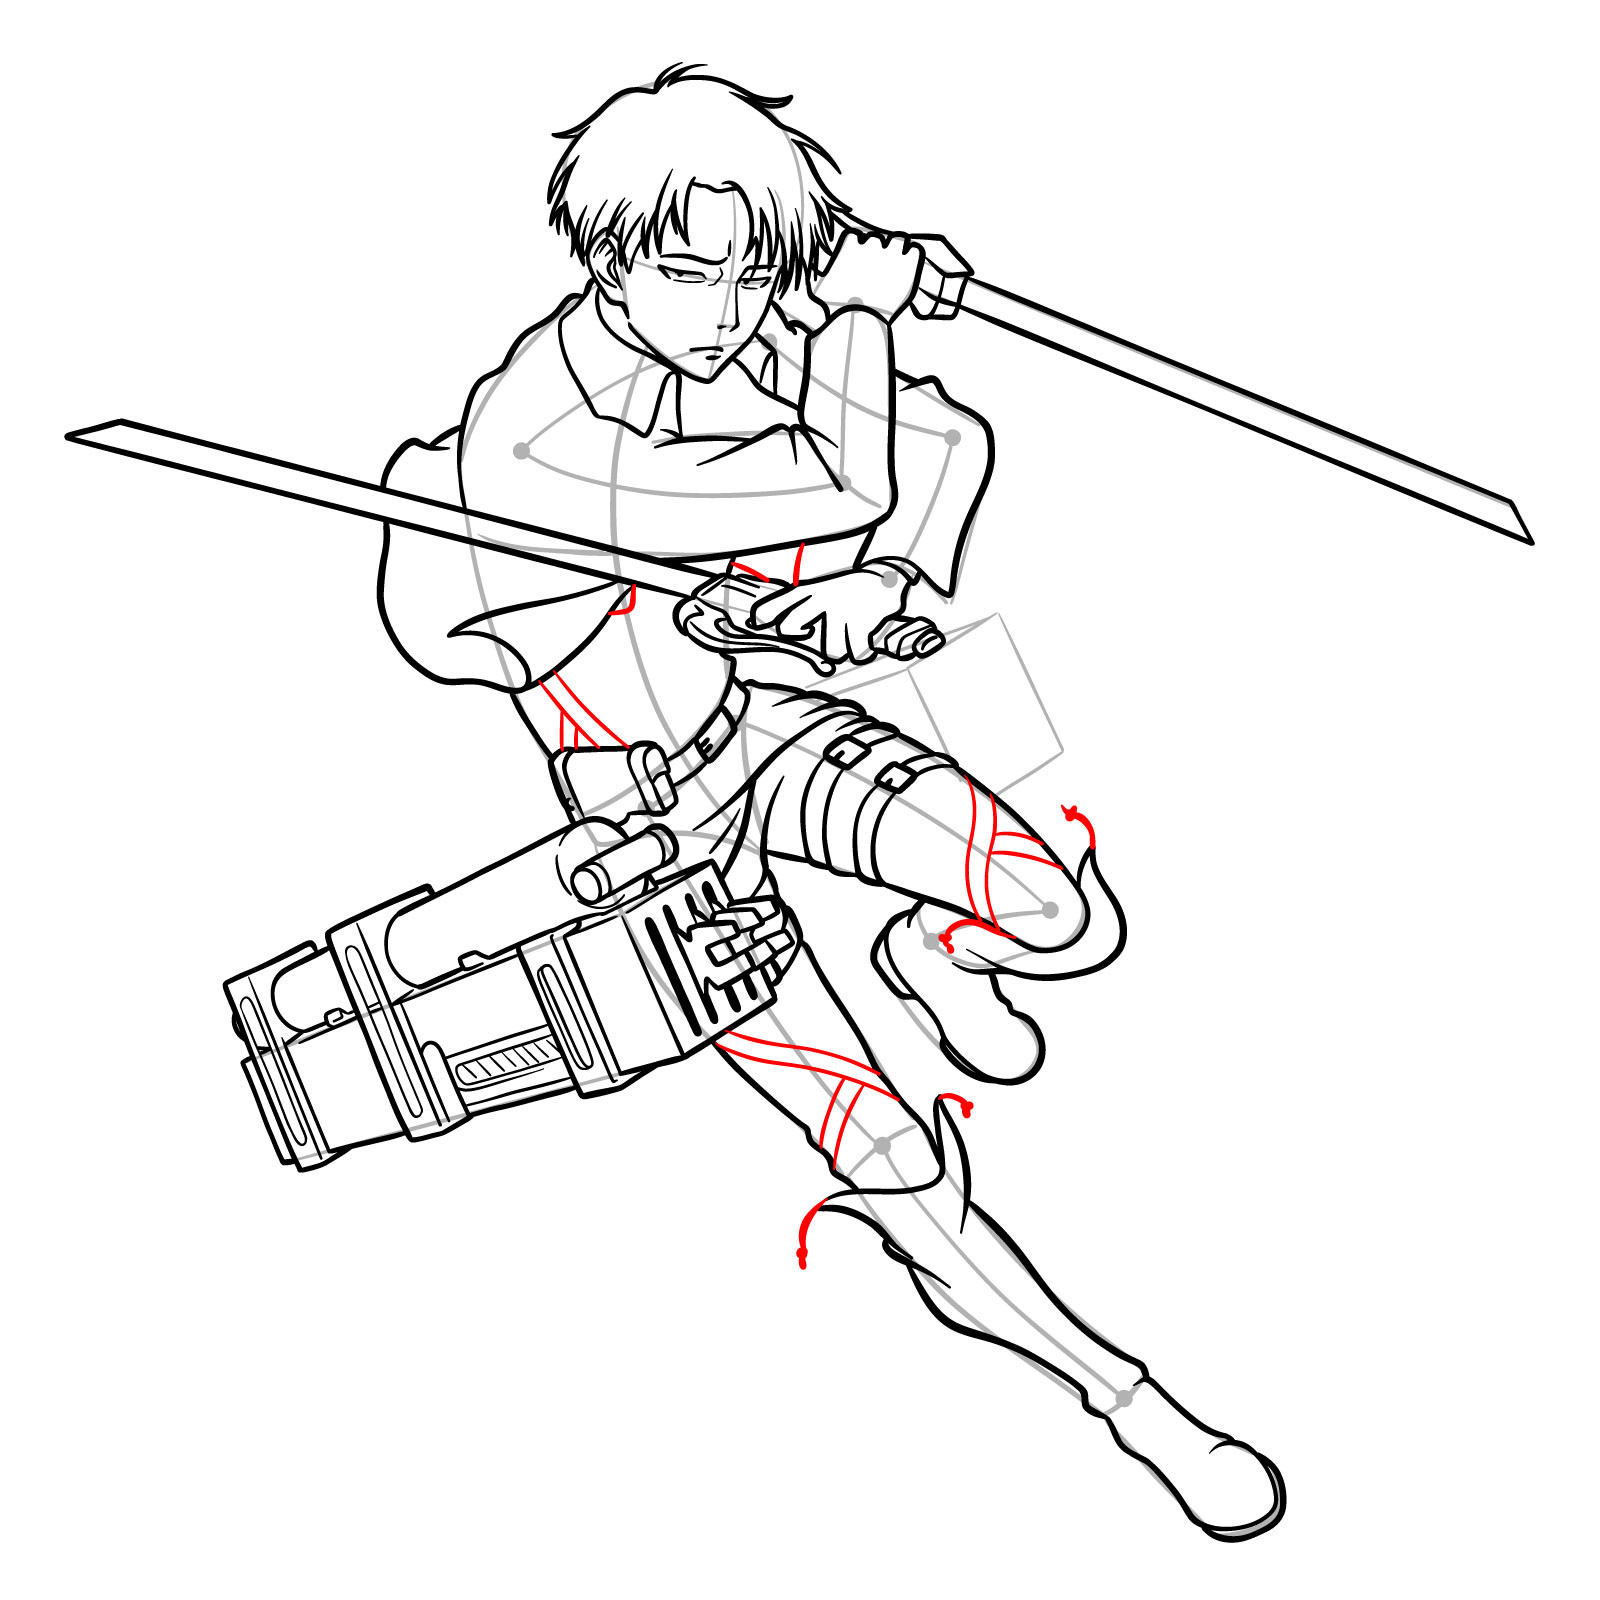 Final detailing of Captain Levi's pants, boots, and jacket in an action drawing - step 30